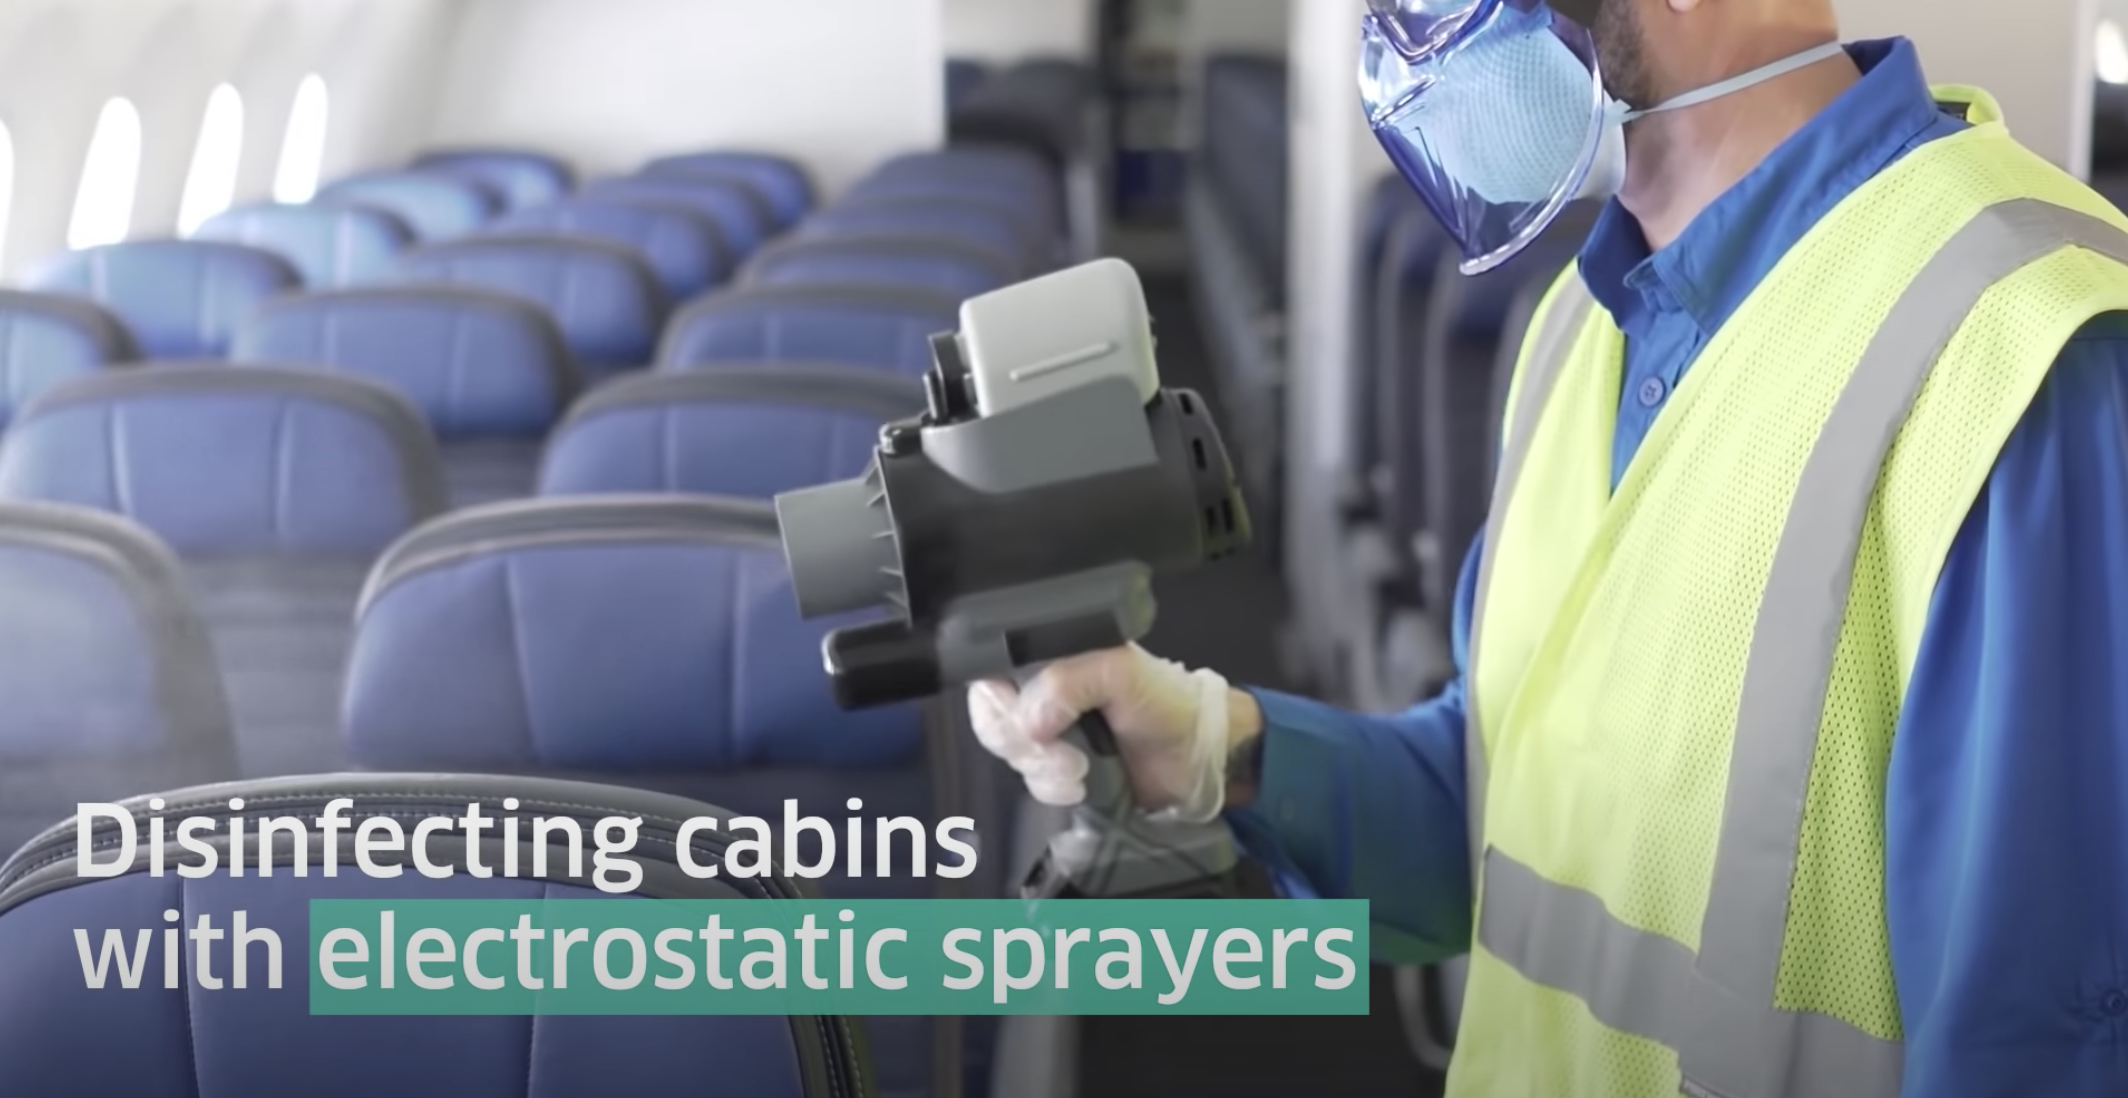 Disinfecting cabins with electrostatic sprayers